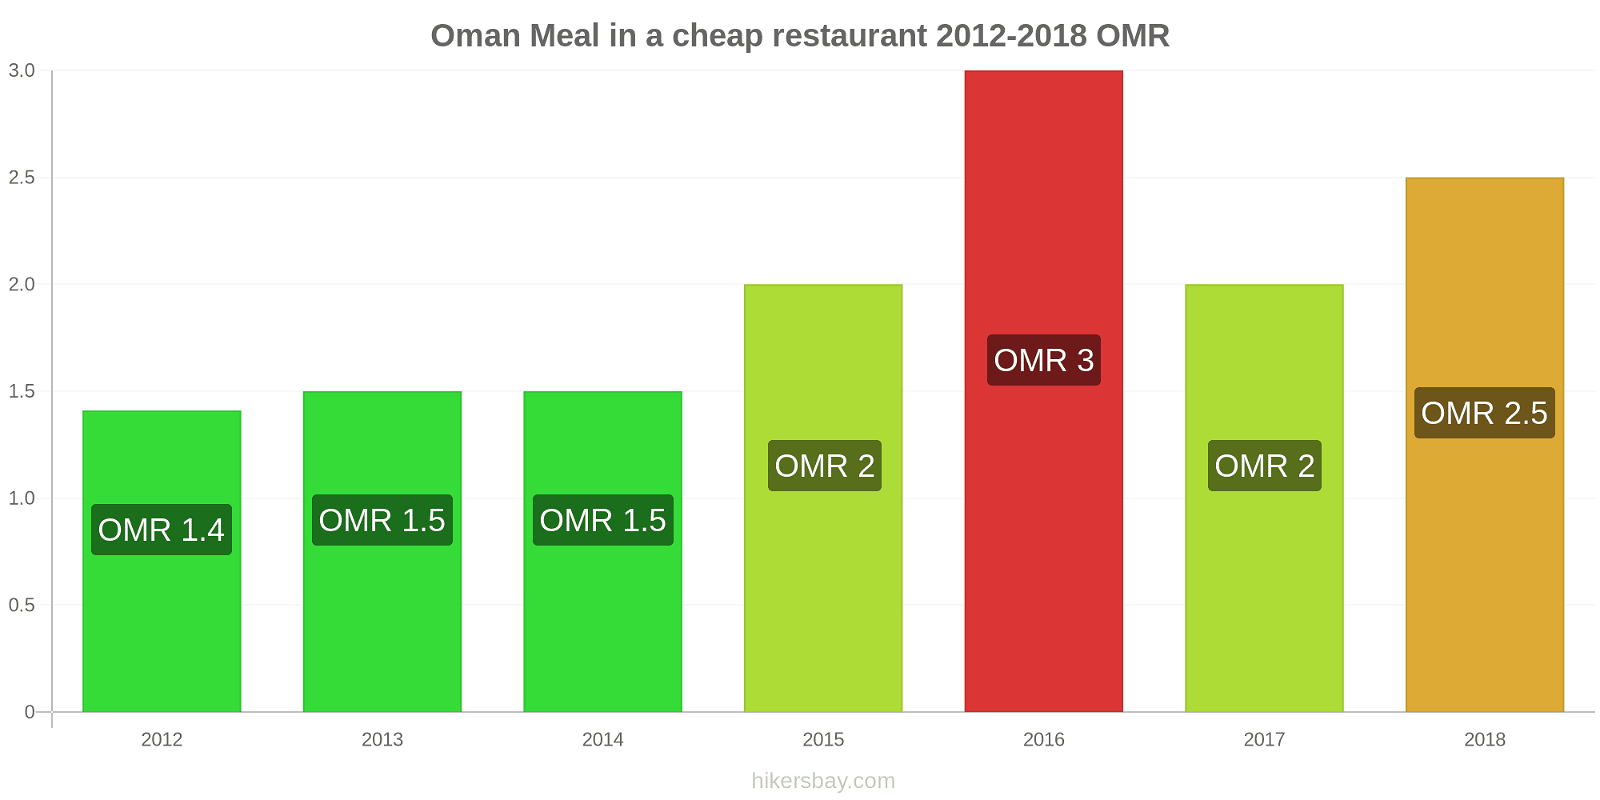 Oman price changes Meal in a cheap restaurant hikersbay.com